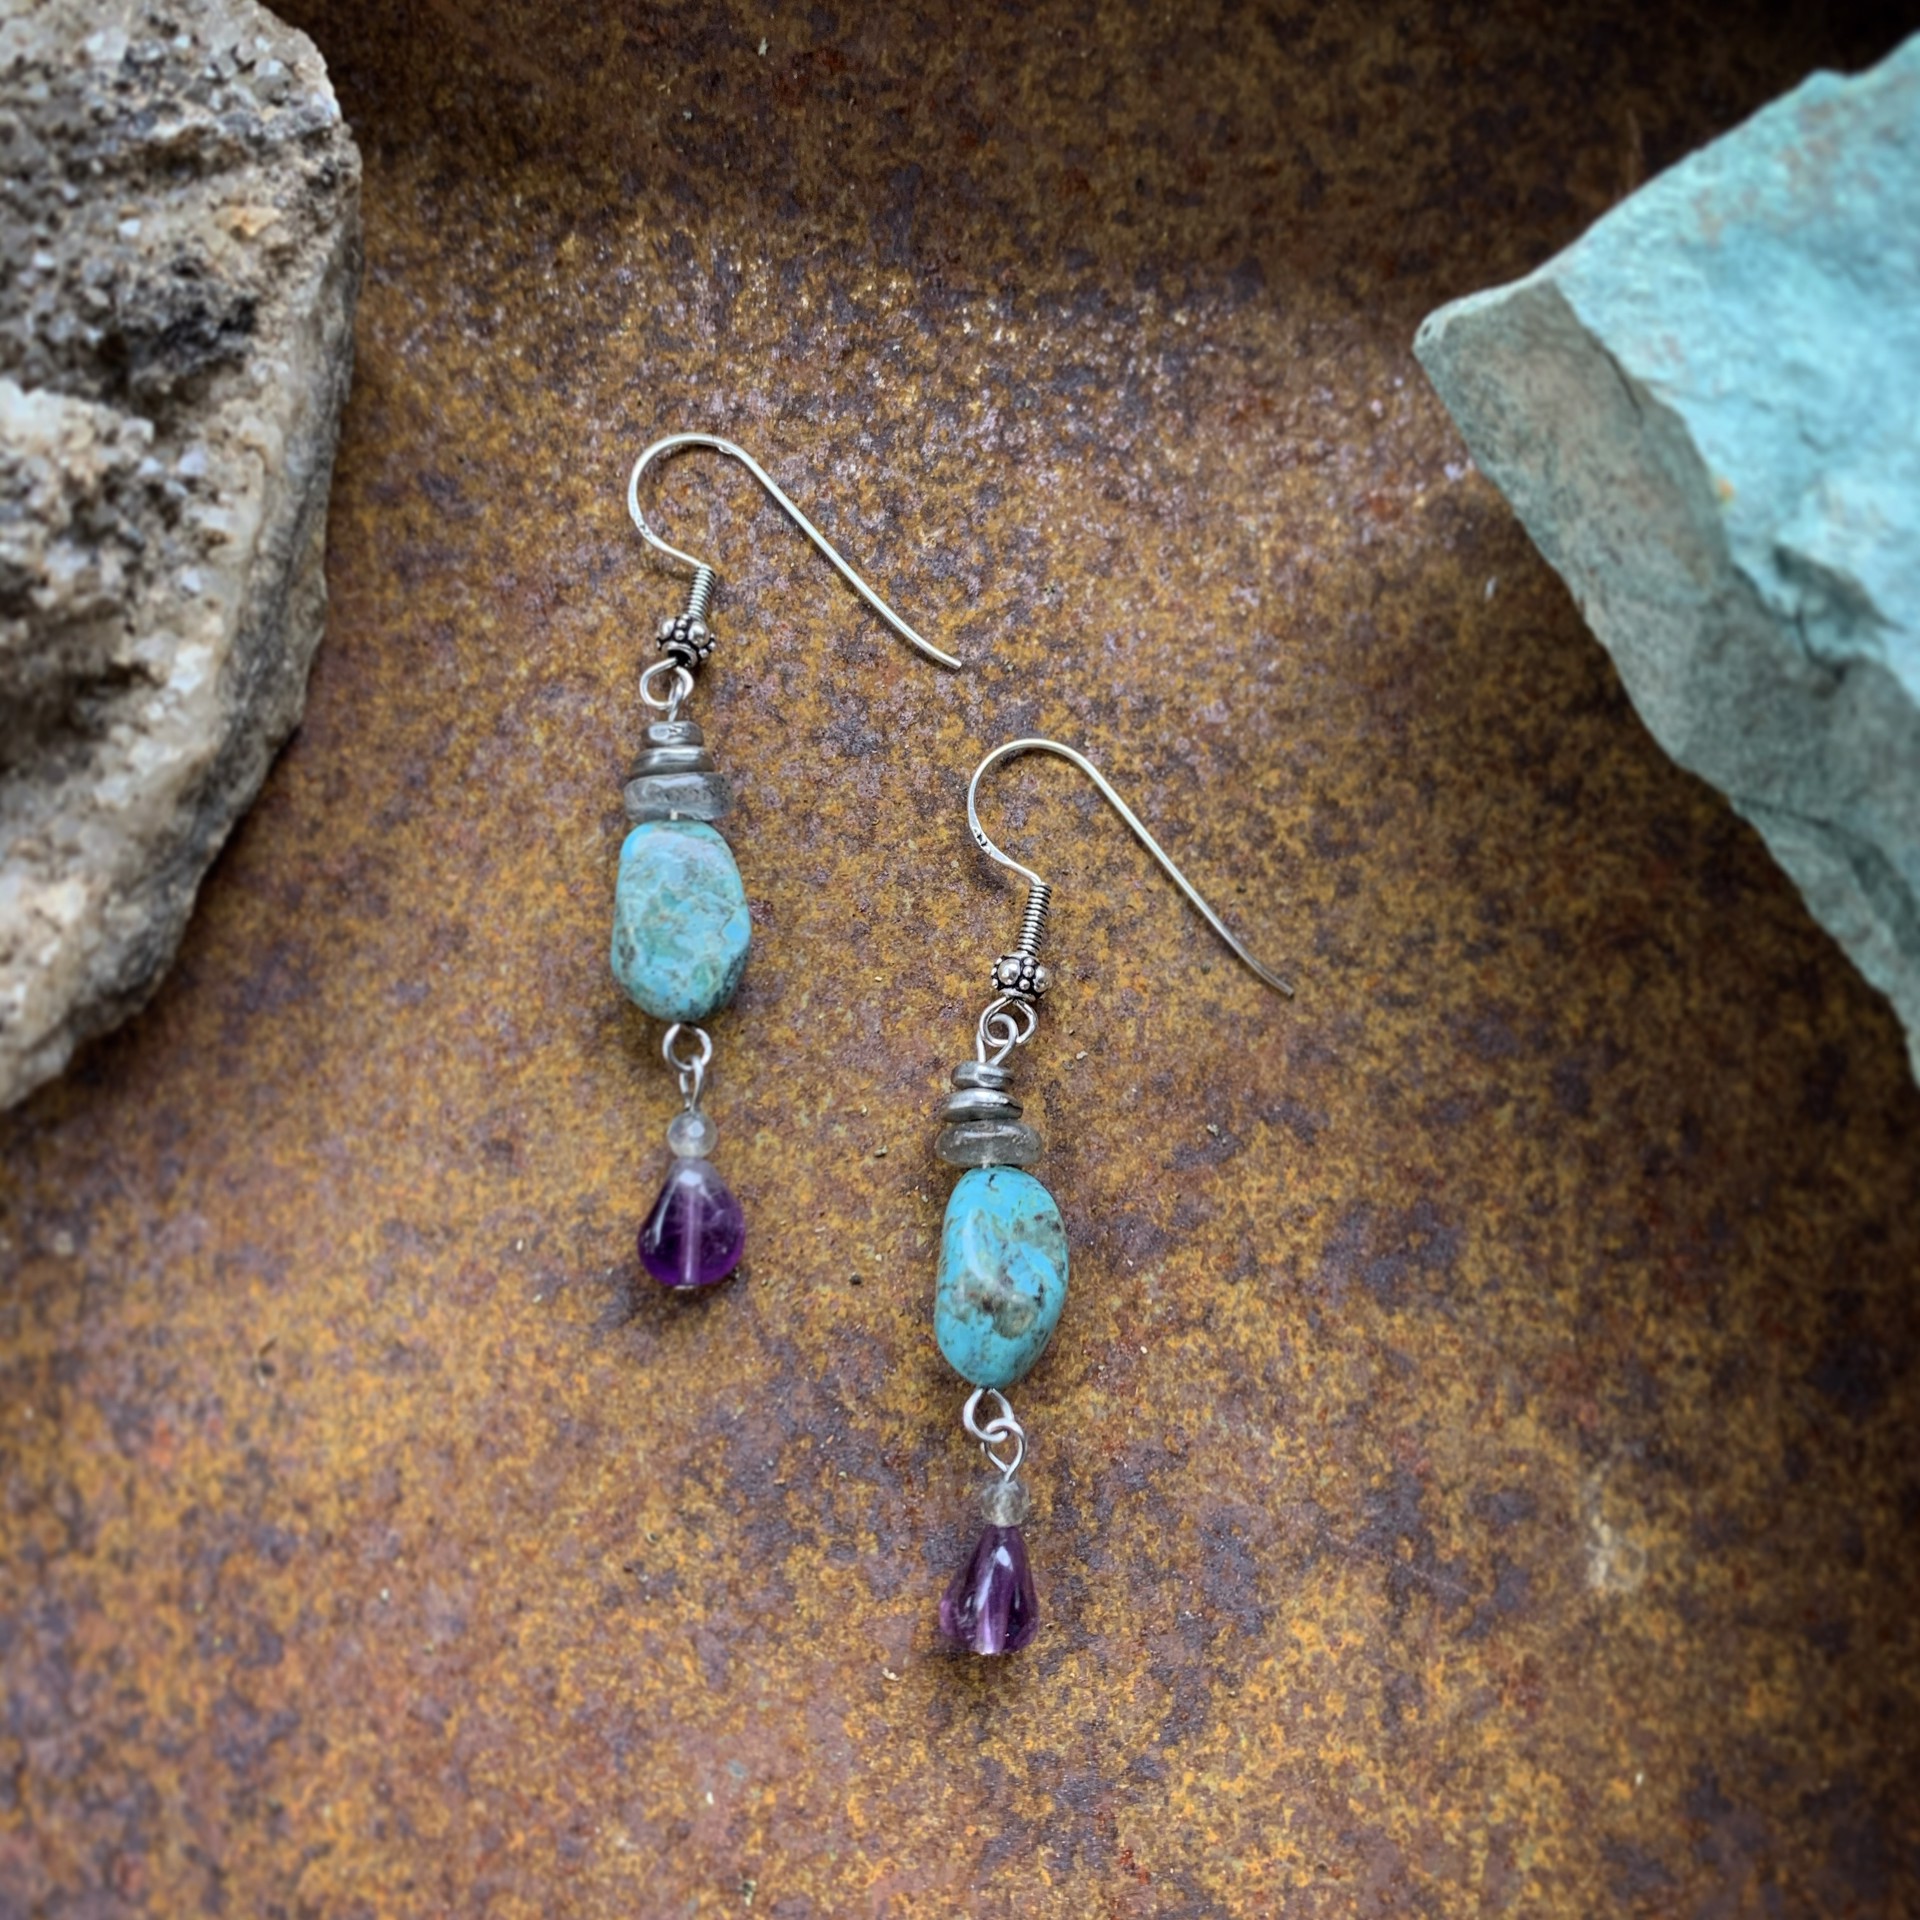 K441 Turquoise and Amethyst Earrings by Kelly Ormsby